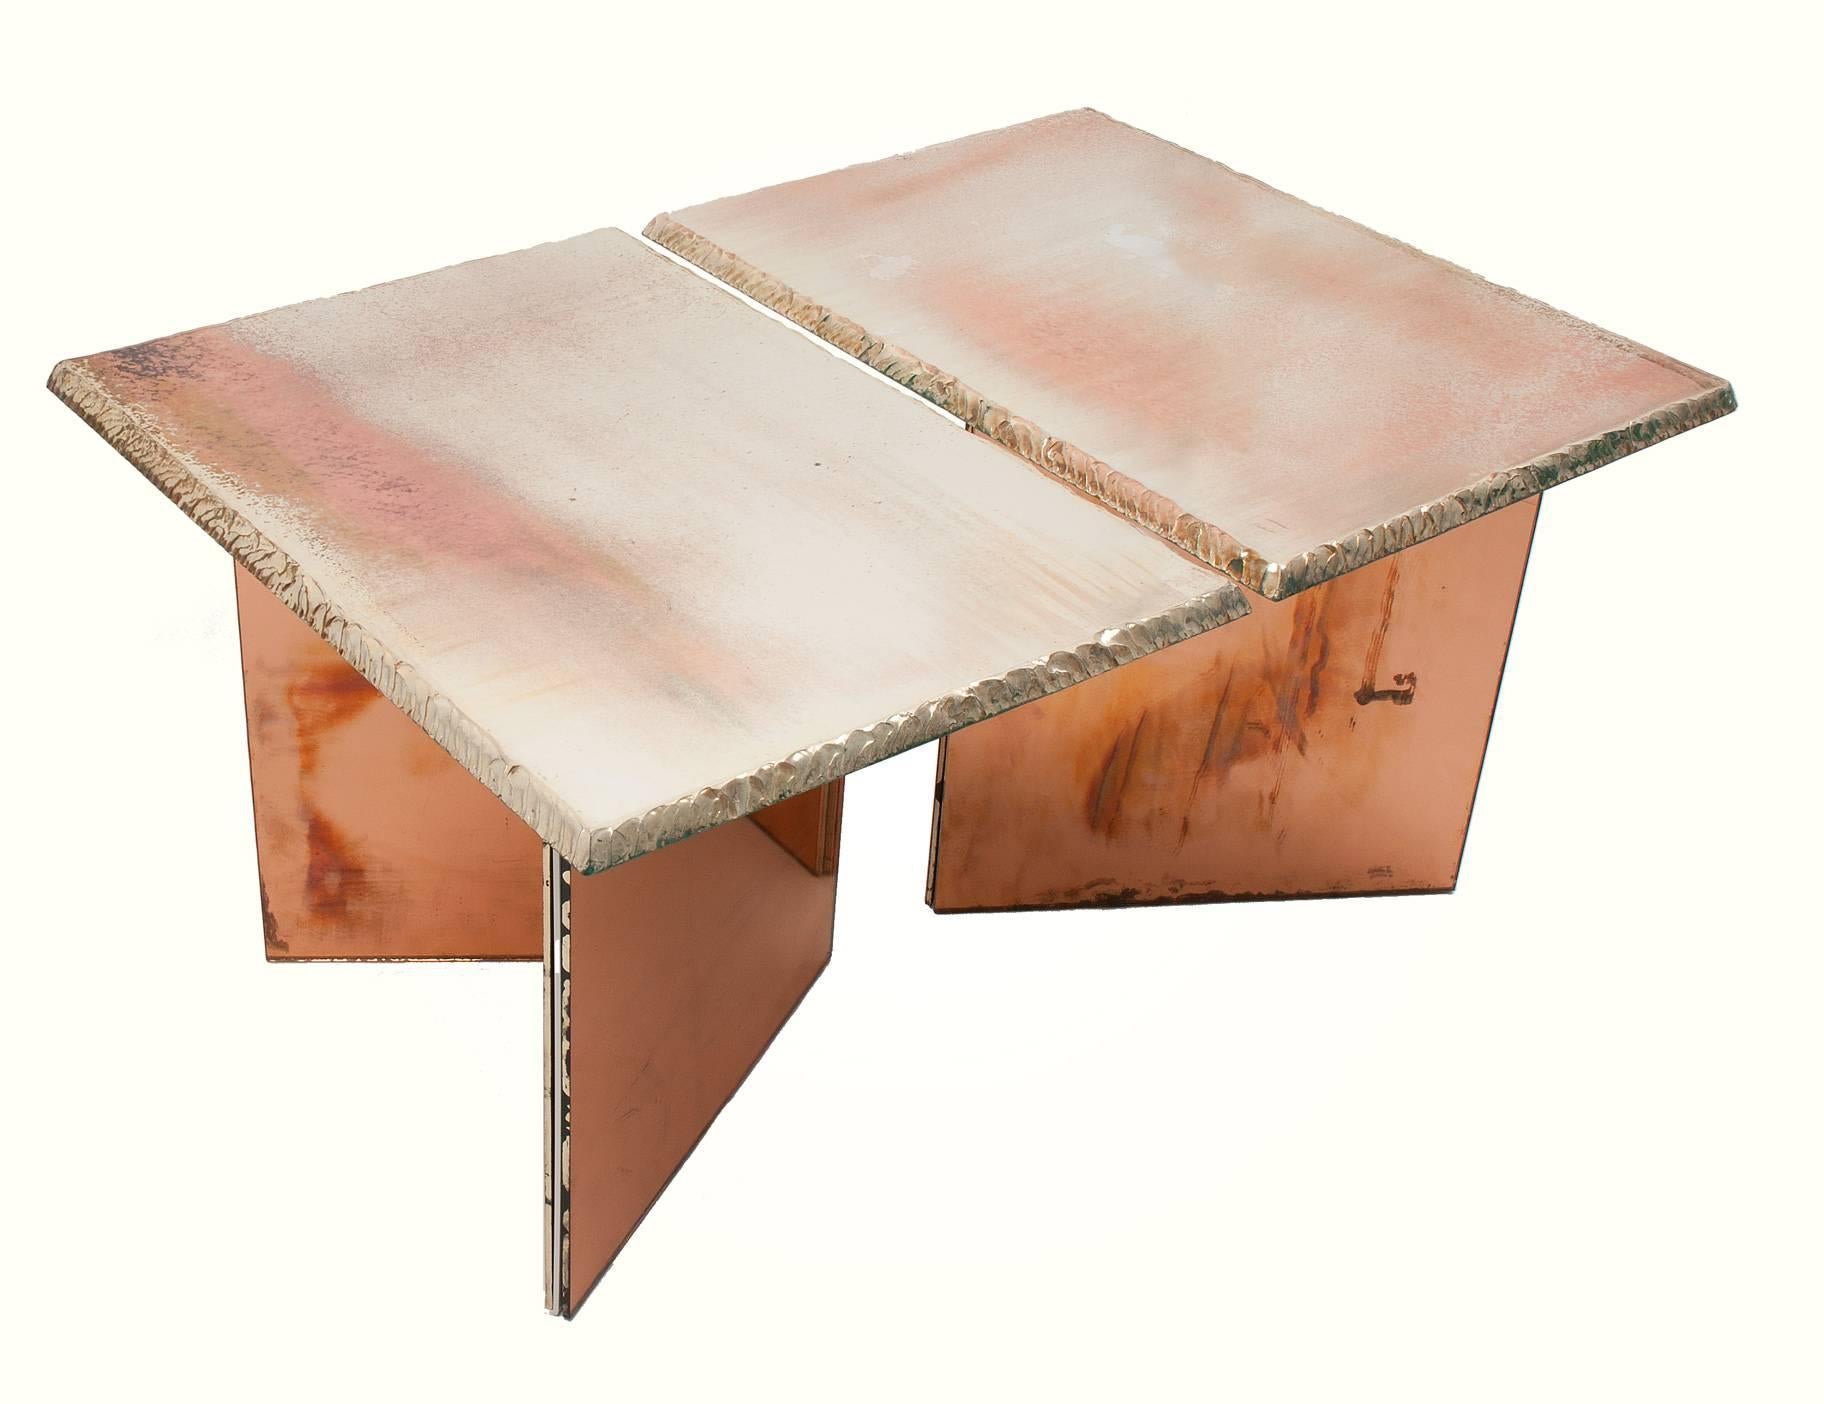 Modern Fly Coffee Table, Two Separate Elements Coated Silvered Glass 70x50cm each one